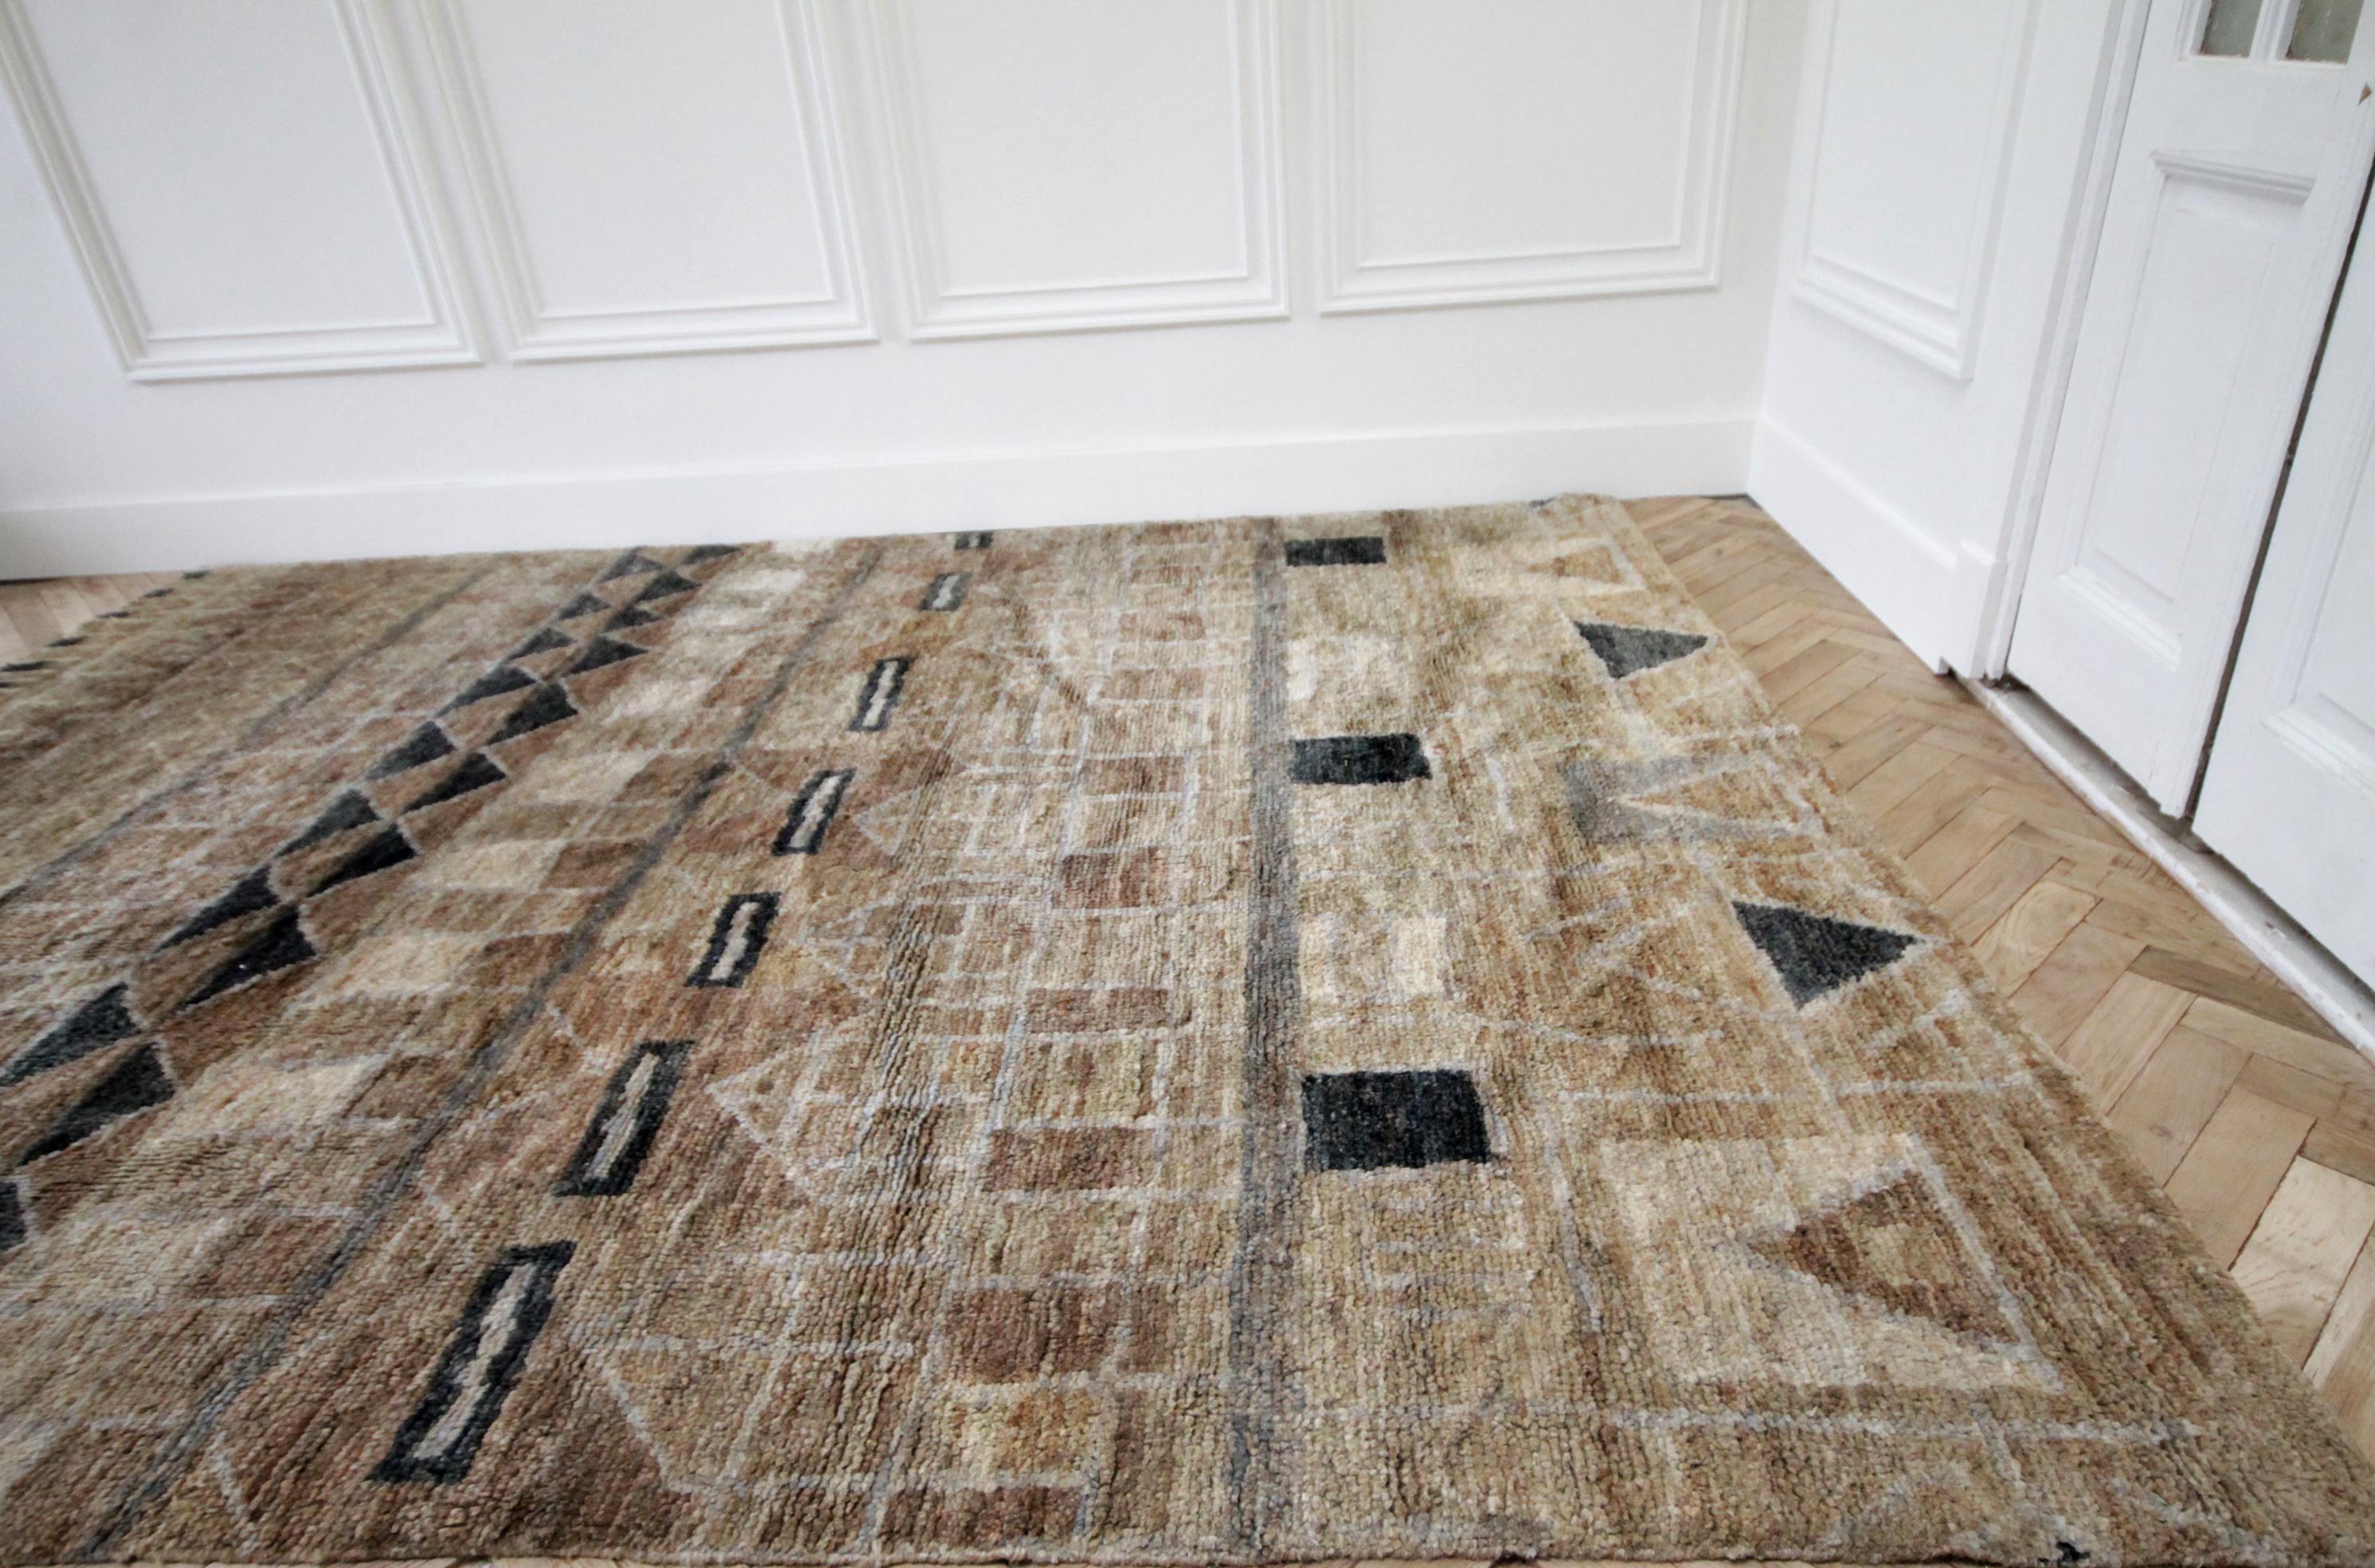 Vintage wool and natural fiber rug
Colors: Tan, brown, gold, black, and creams.
Size: 9 feet x 12 feet 4 inches
Condition: Good, this rug is a wool and natural fiber, the feel is more like a just rug. Great rug for high traffic areas.
 